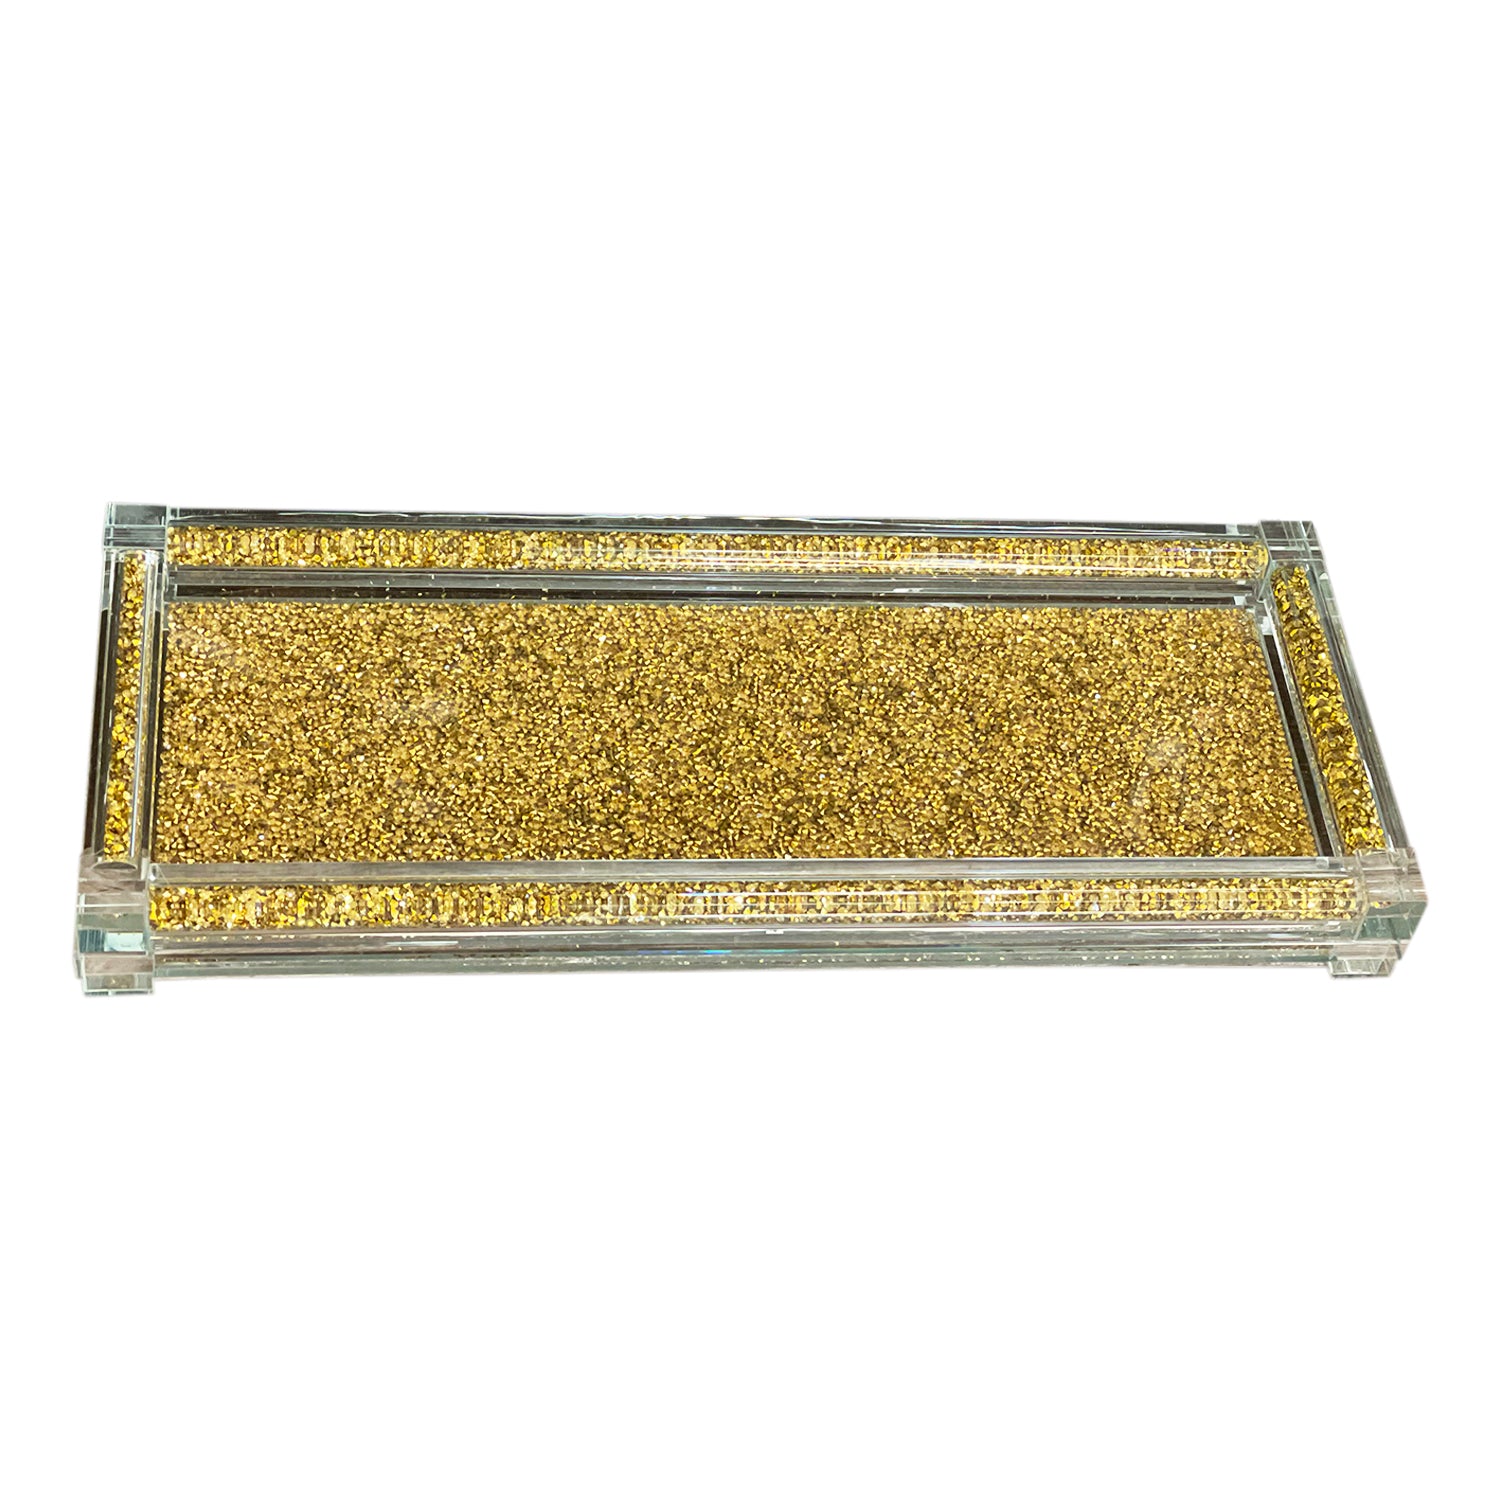 Ambrose Exquisite Large Glass Tray in Gift Box gold-glass